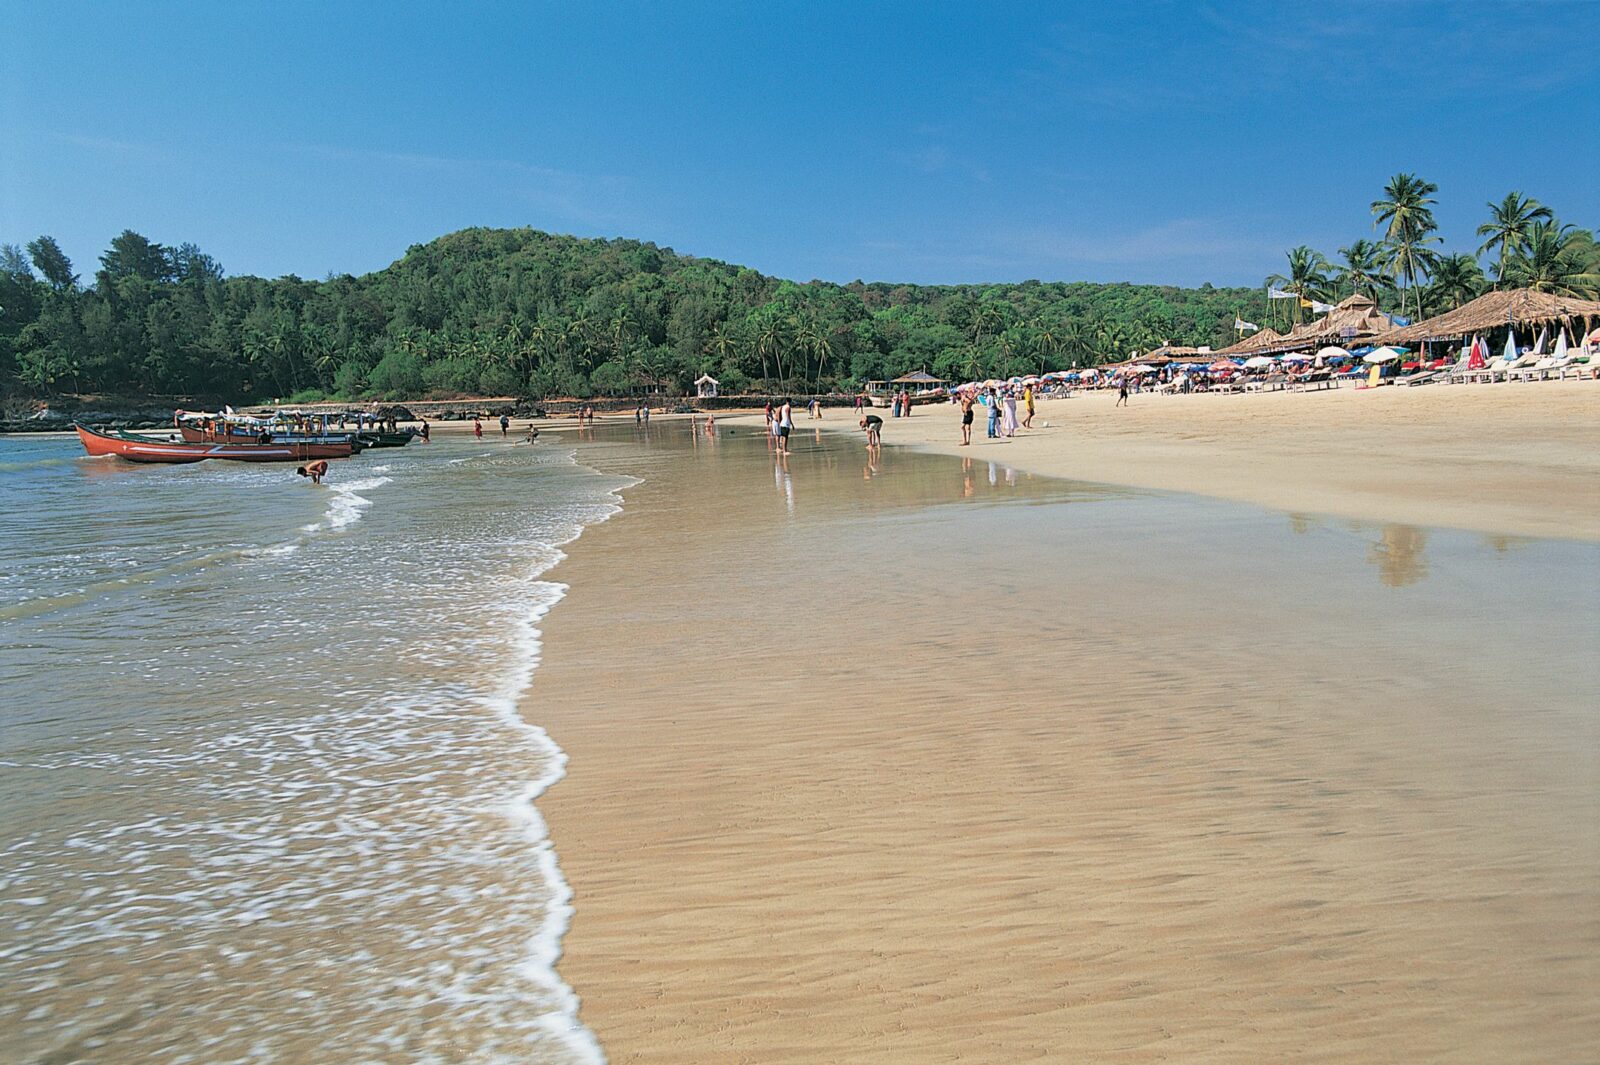 Baga Beach Goa - Timings, Entry Ticket, Best Season, Attractions & More